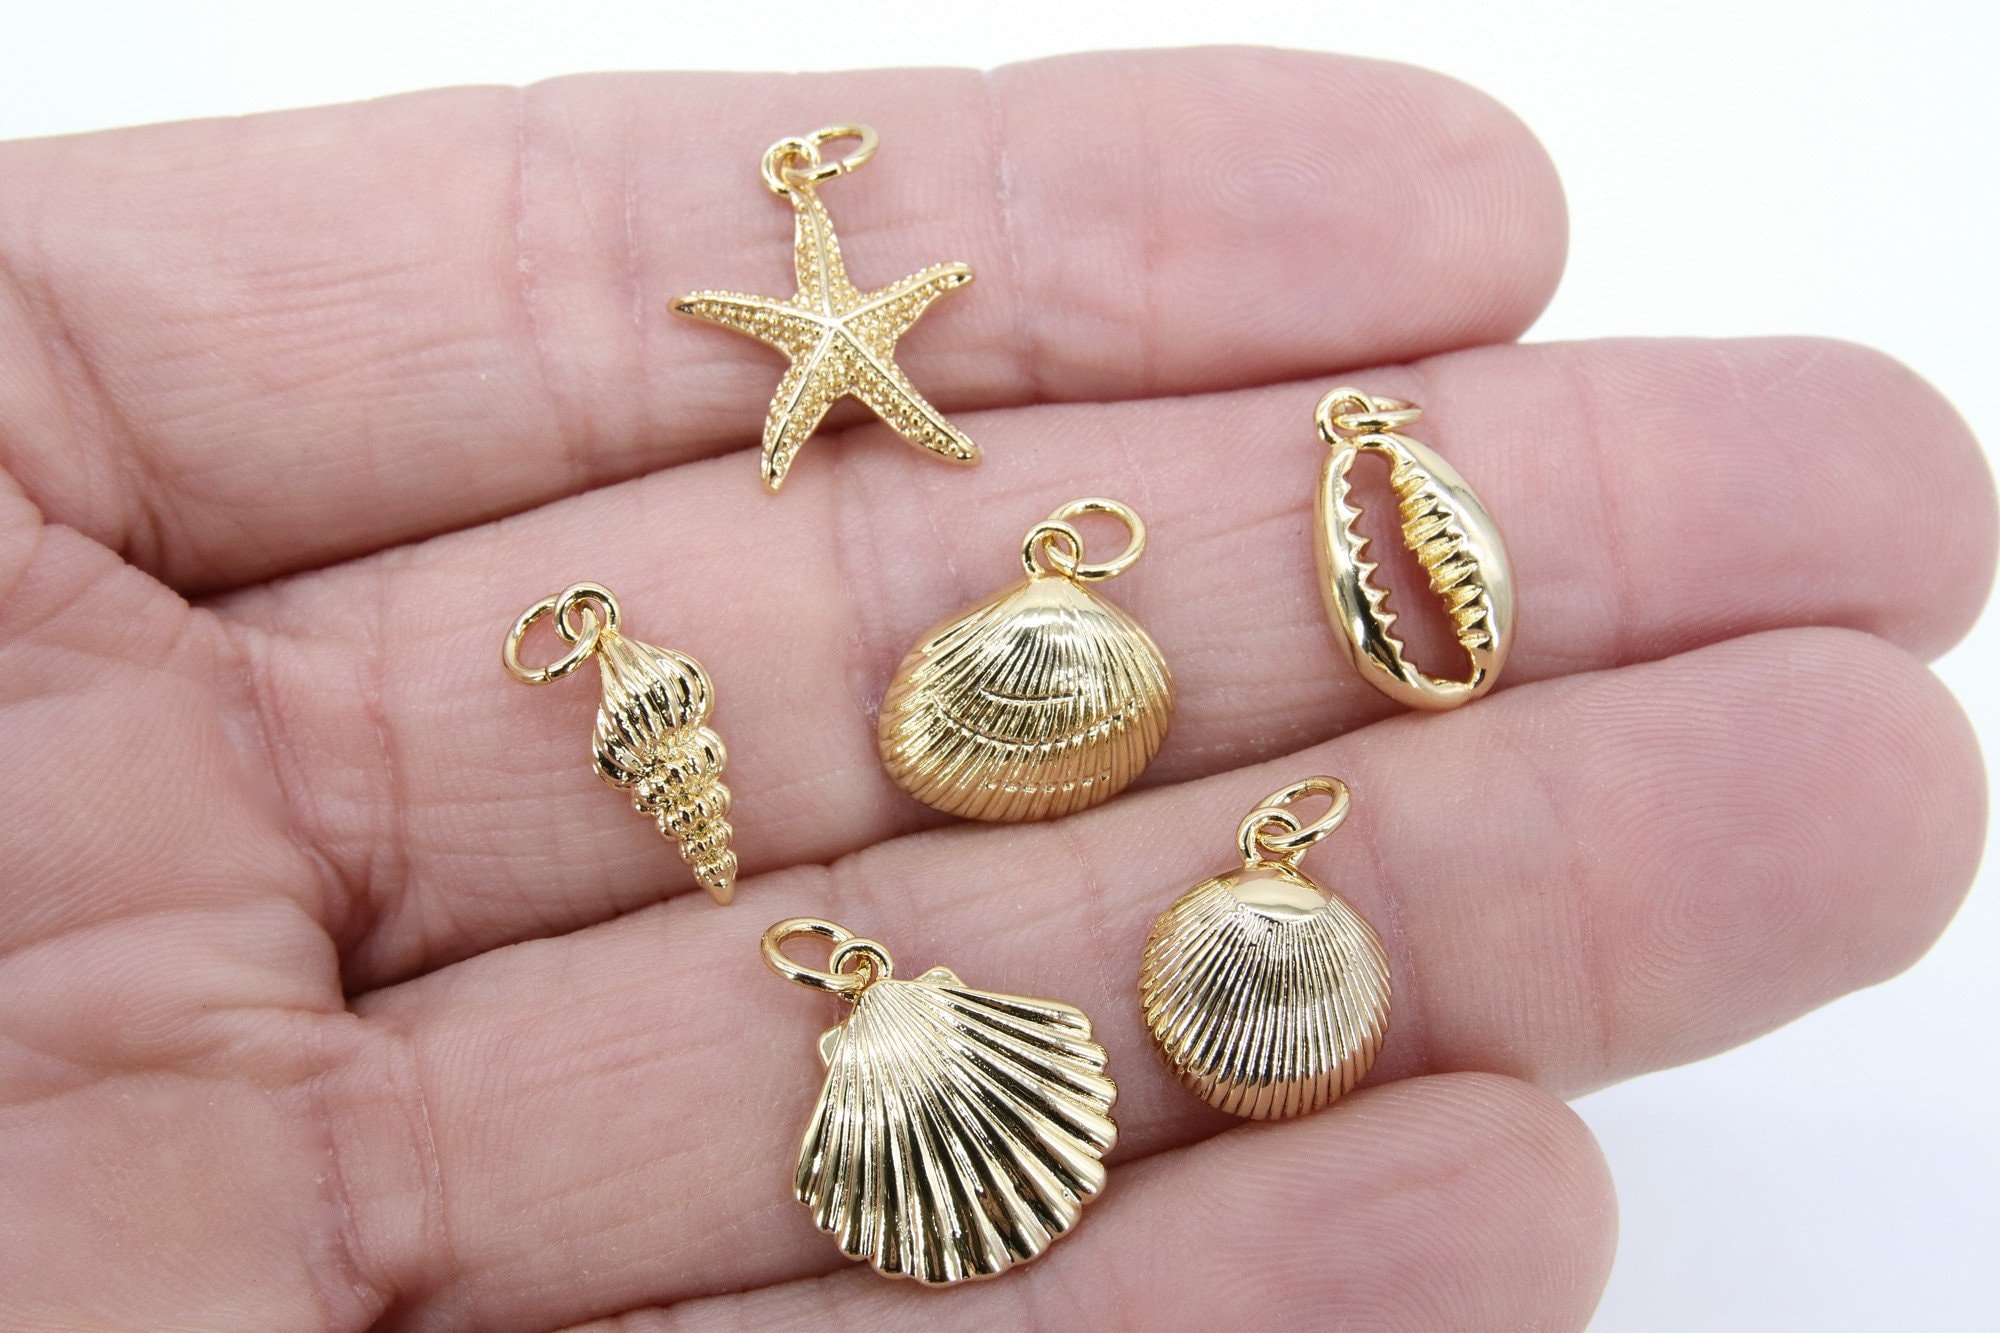 Garnish: Starter Kit for Cute Charms in 14kt Gold Filled (flat styles)